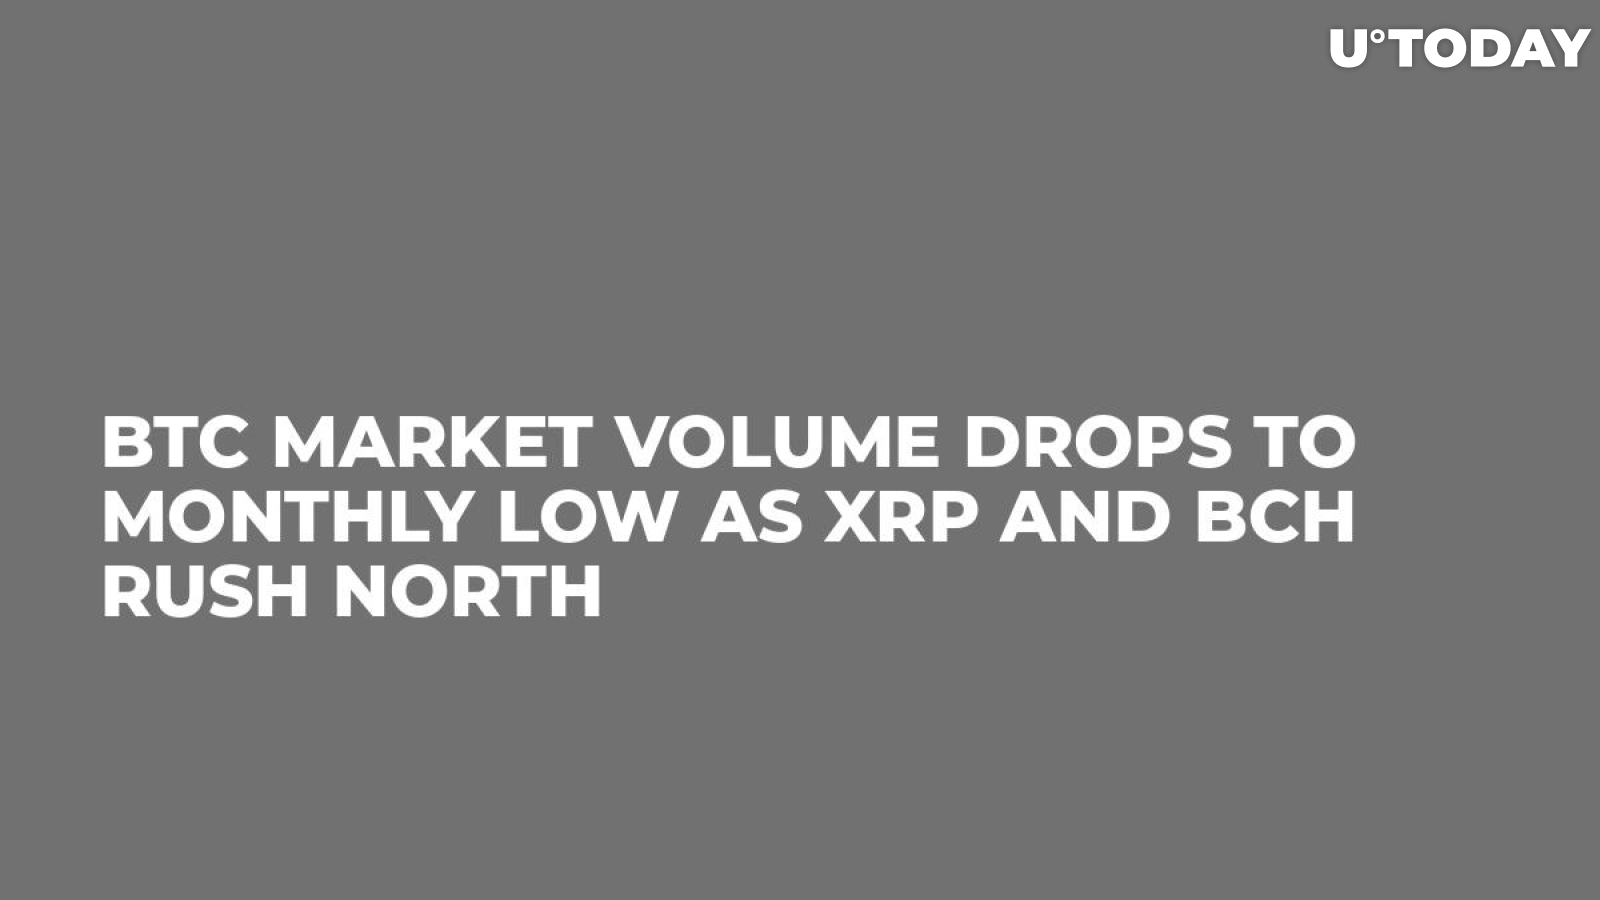 BTC Market Volume Drops to Monthly Low As XRP and BCH Rush North